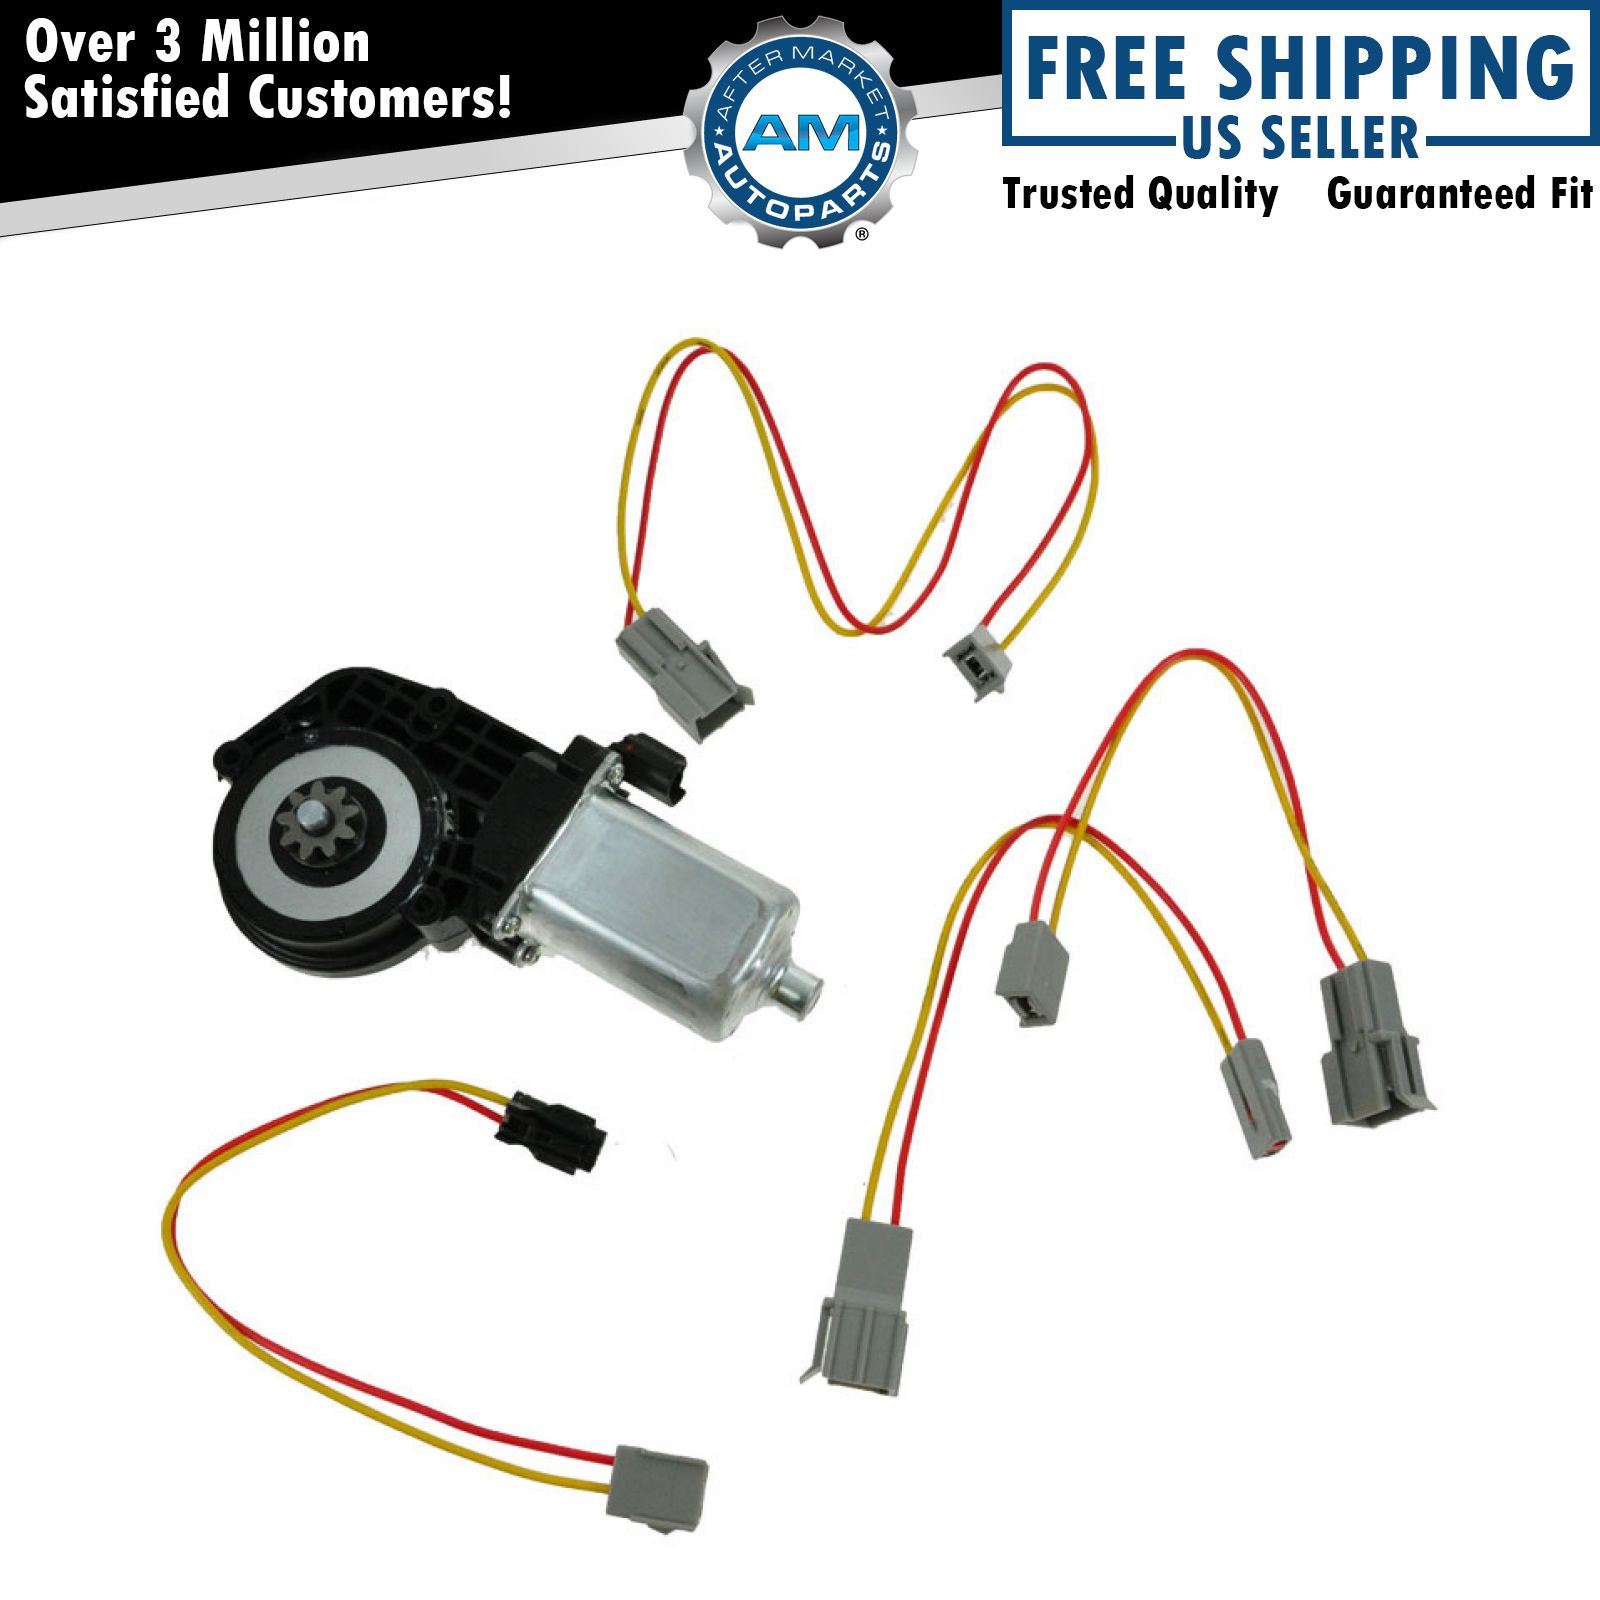 Dorman 9 Tooth Power Window Motor for ford Lincoln Mercury Pickup Truck Car